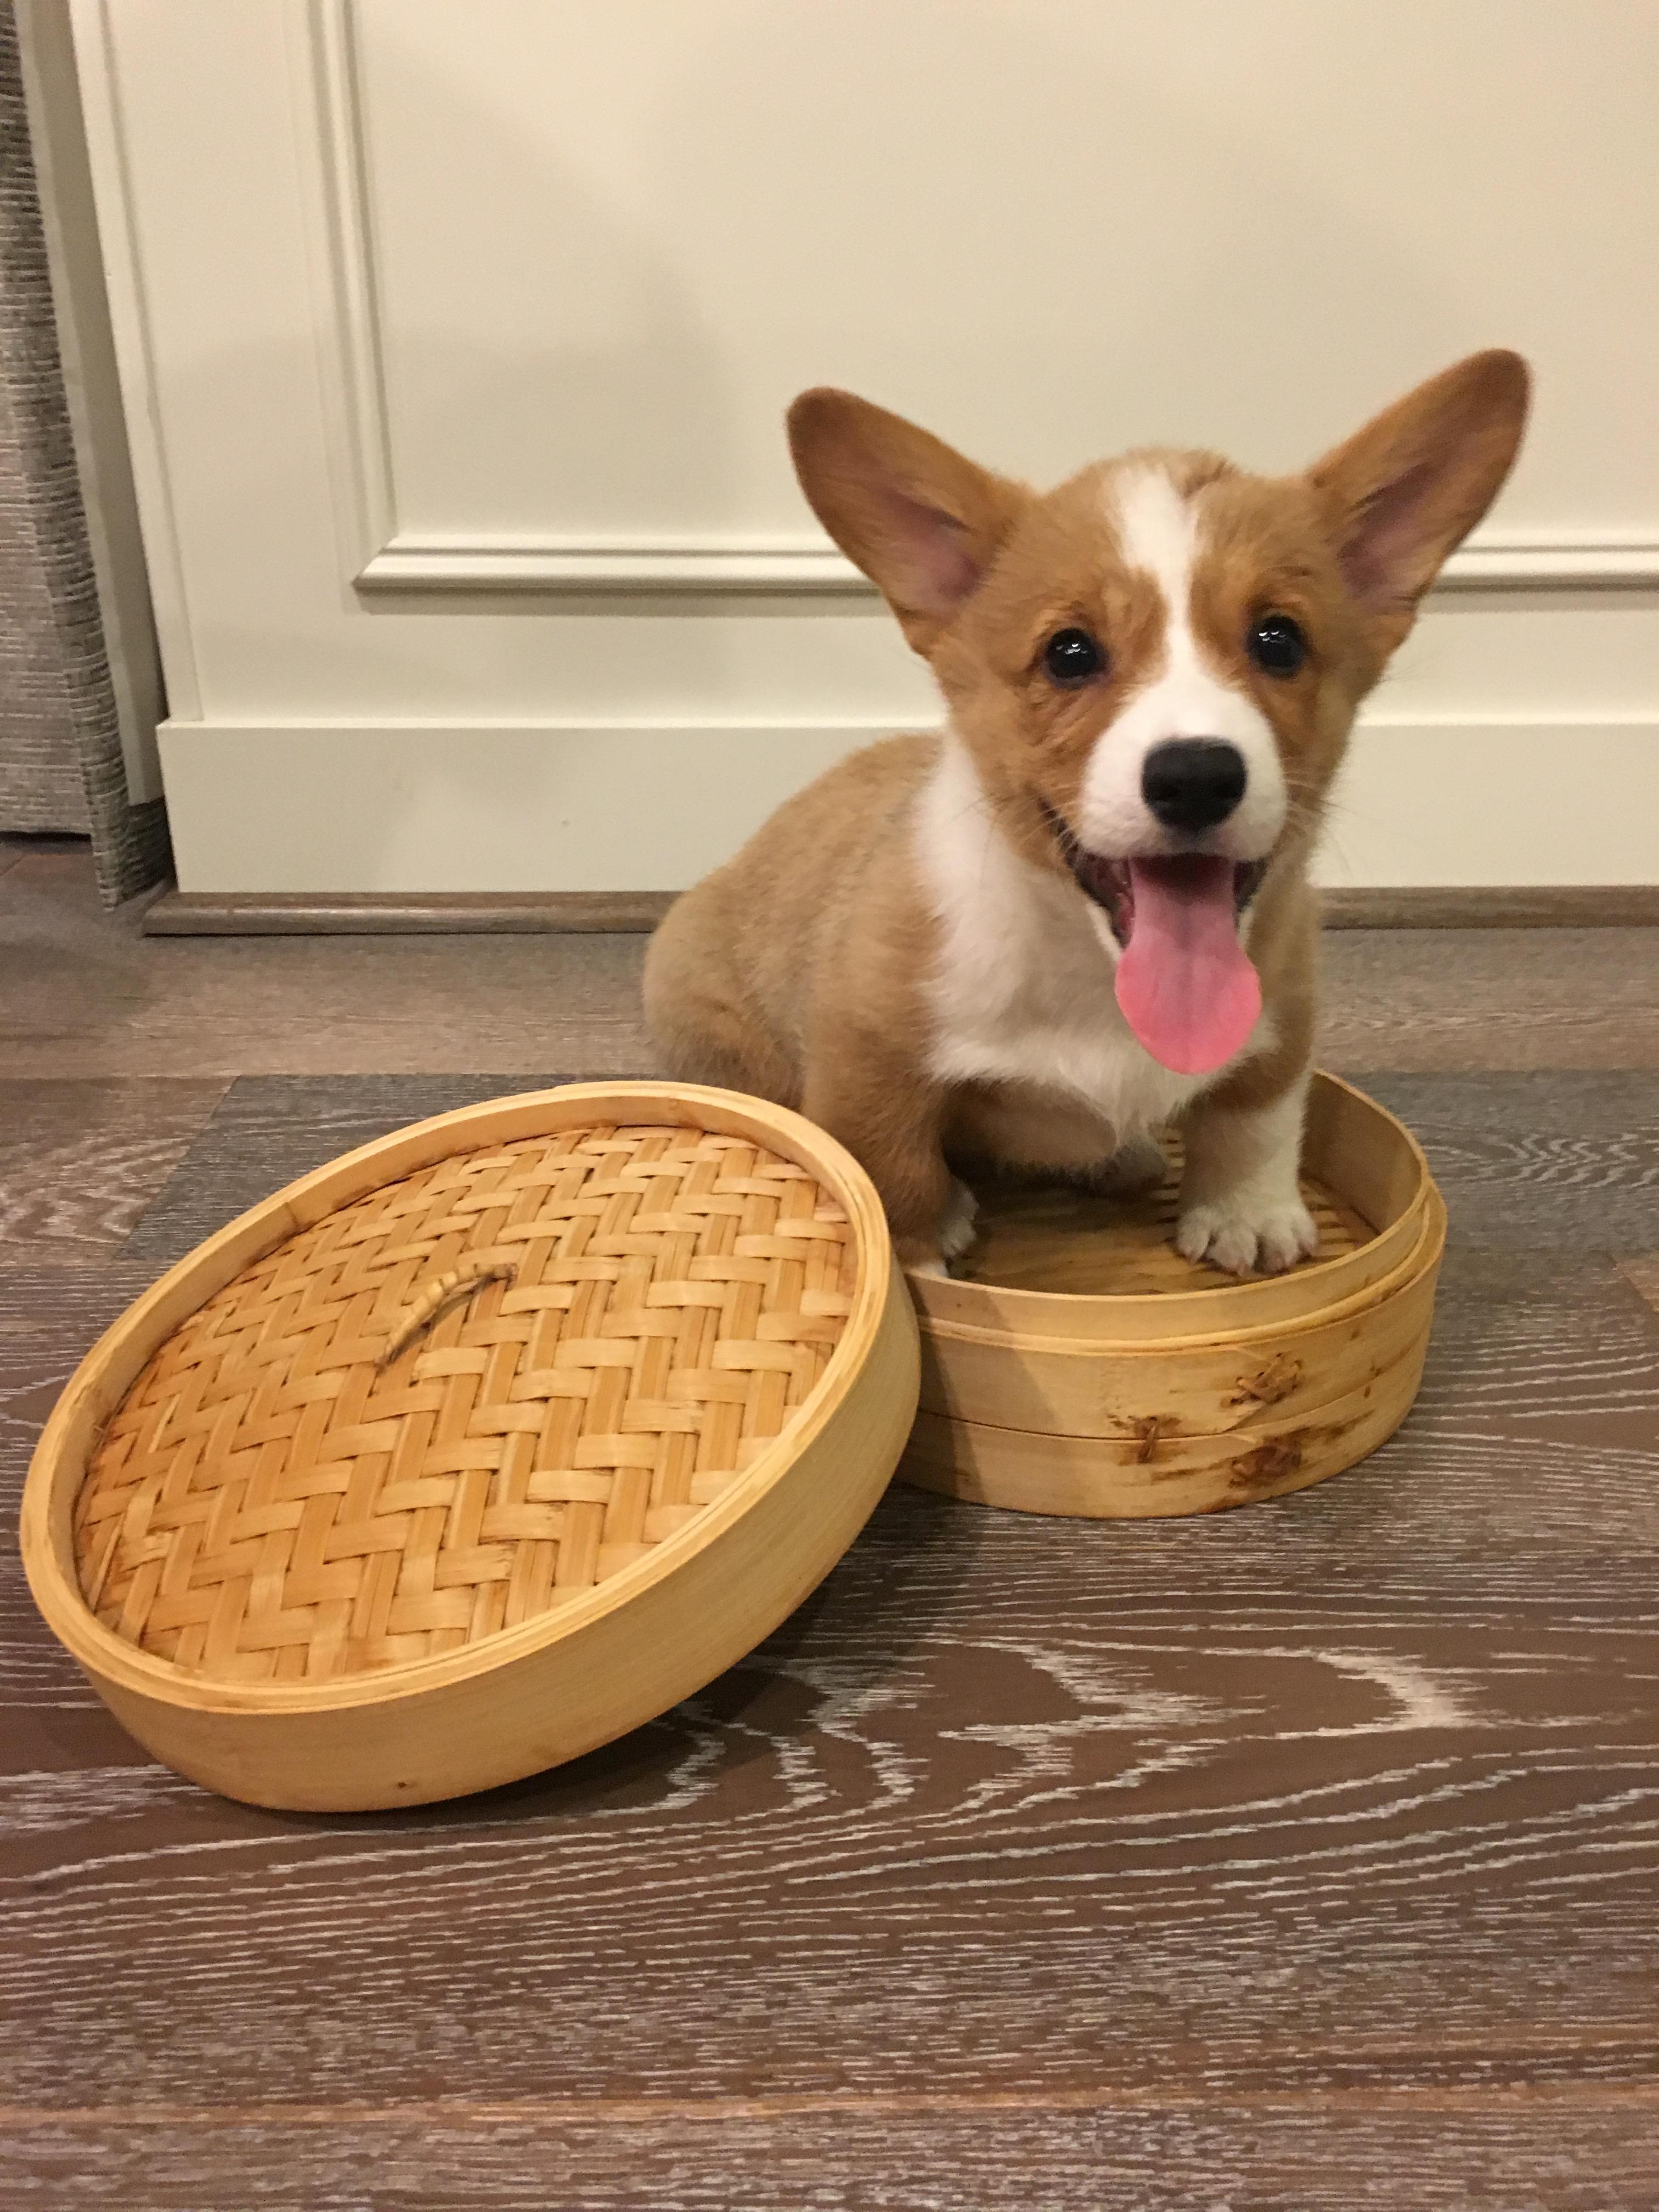 A Corgi puppy sitting inside a round bamboo container on the floor